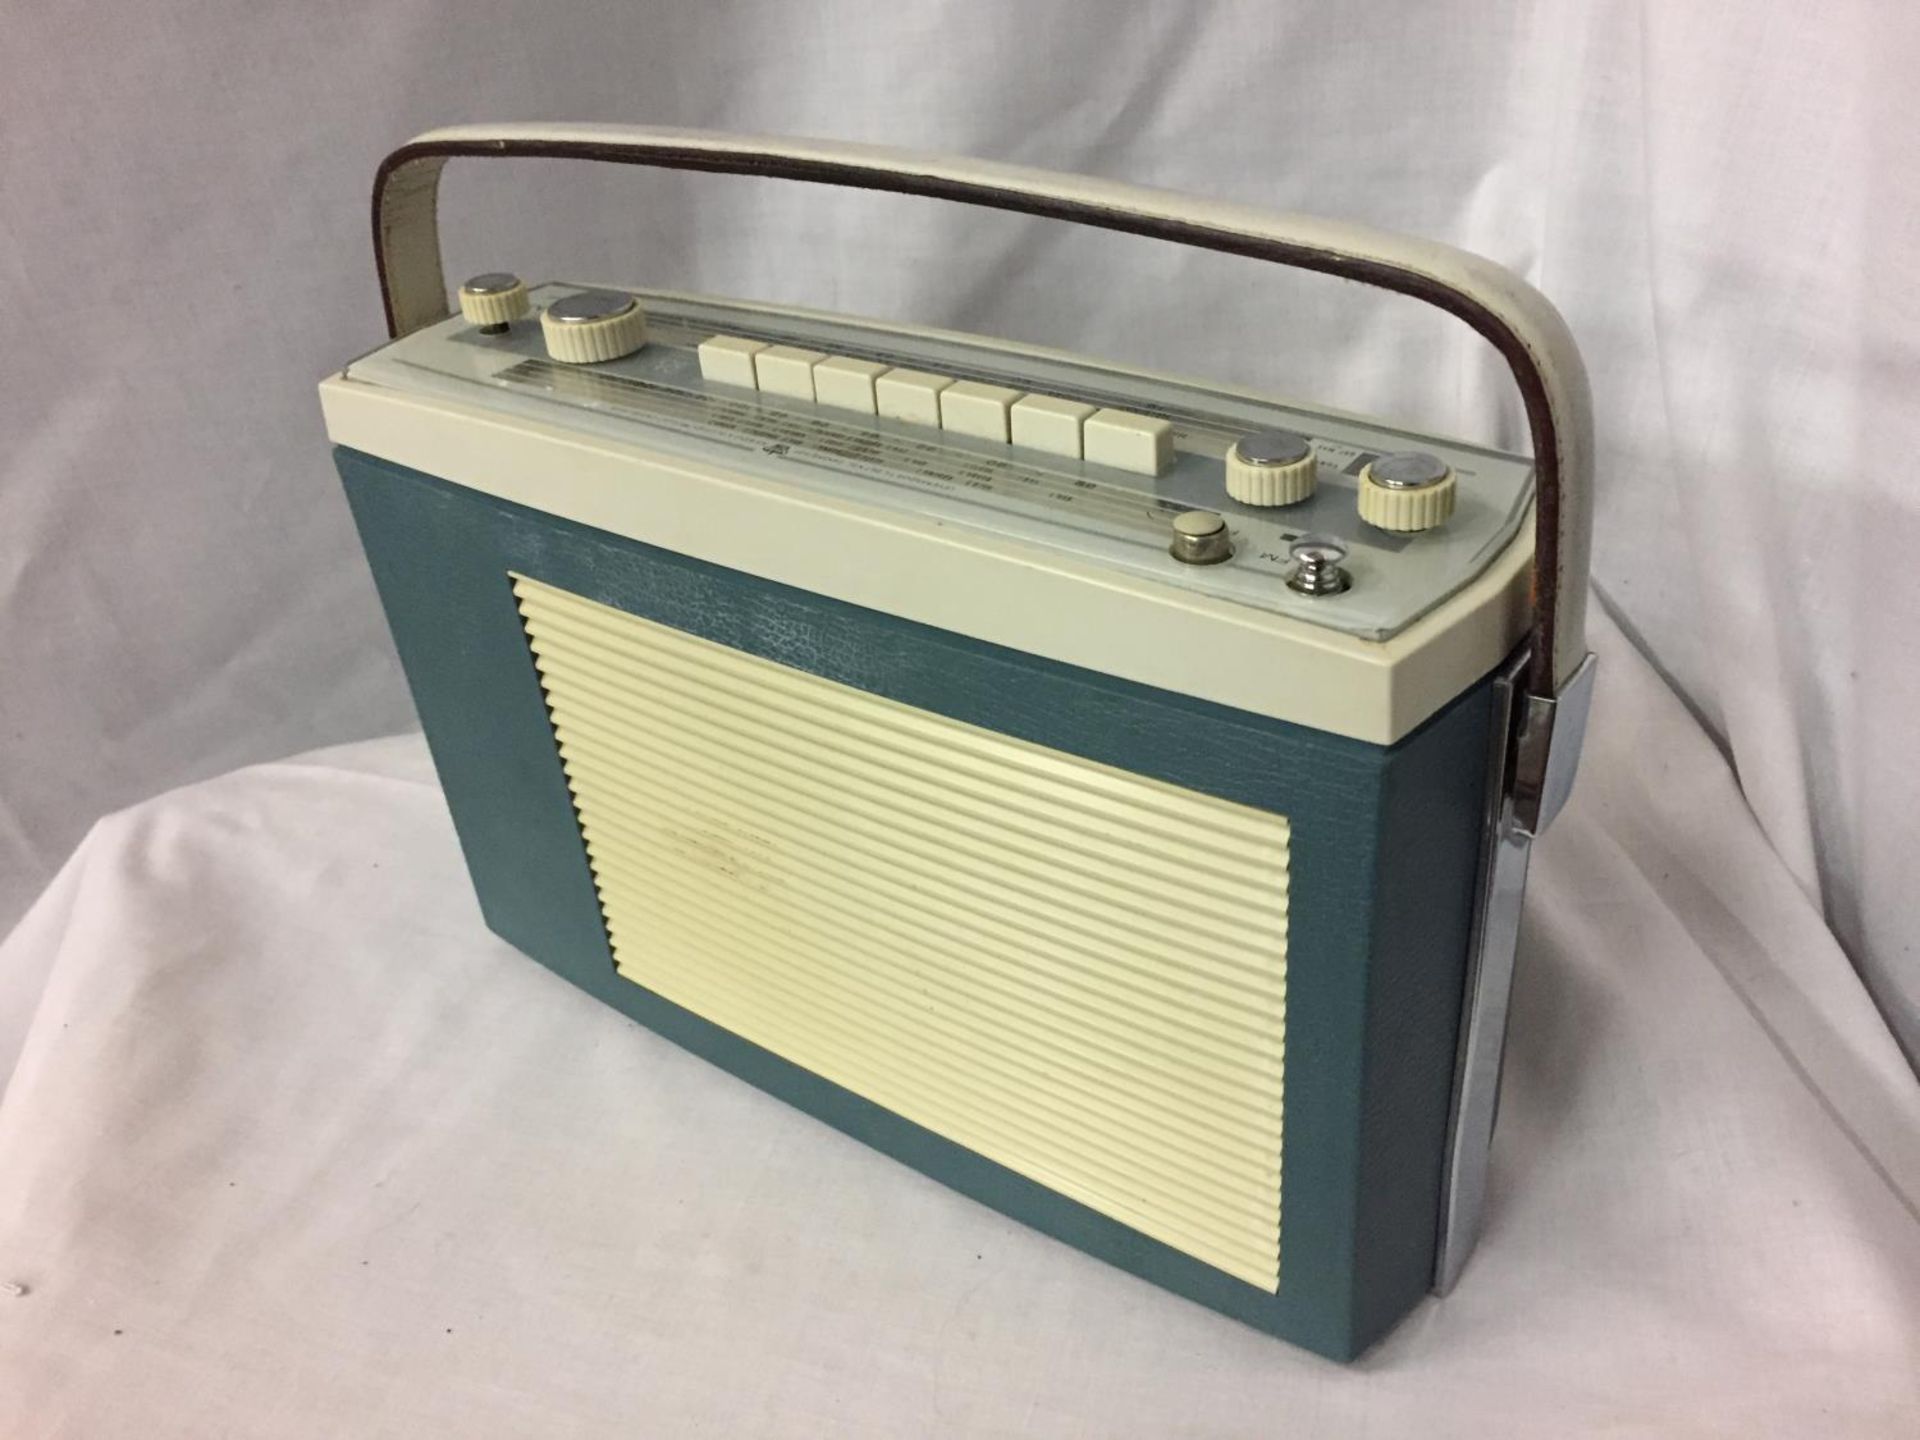 A RETRO BANG AND OLUFSEN RADIO IN A CREAM AND BLUE COLOUR - Image 5 of 5